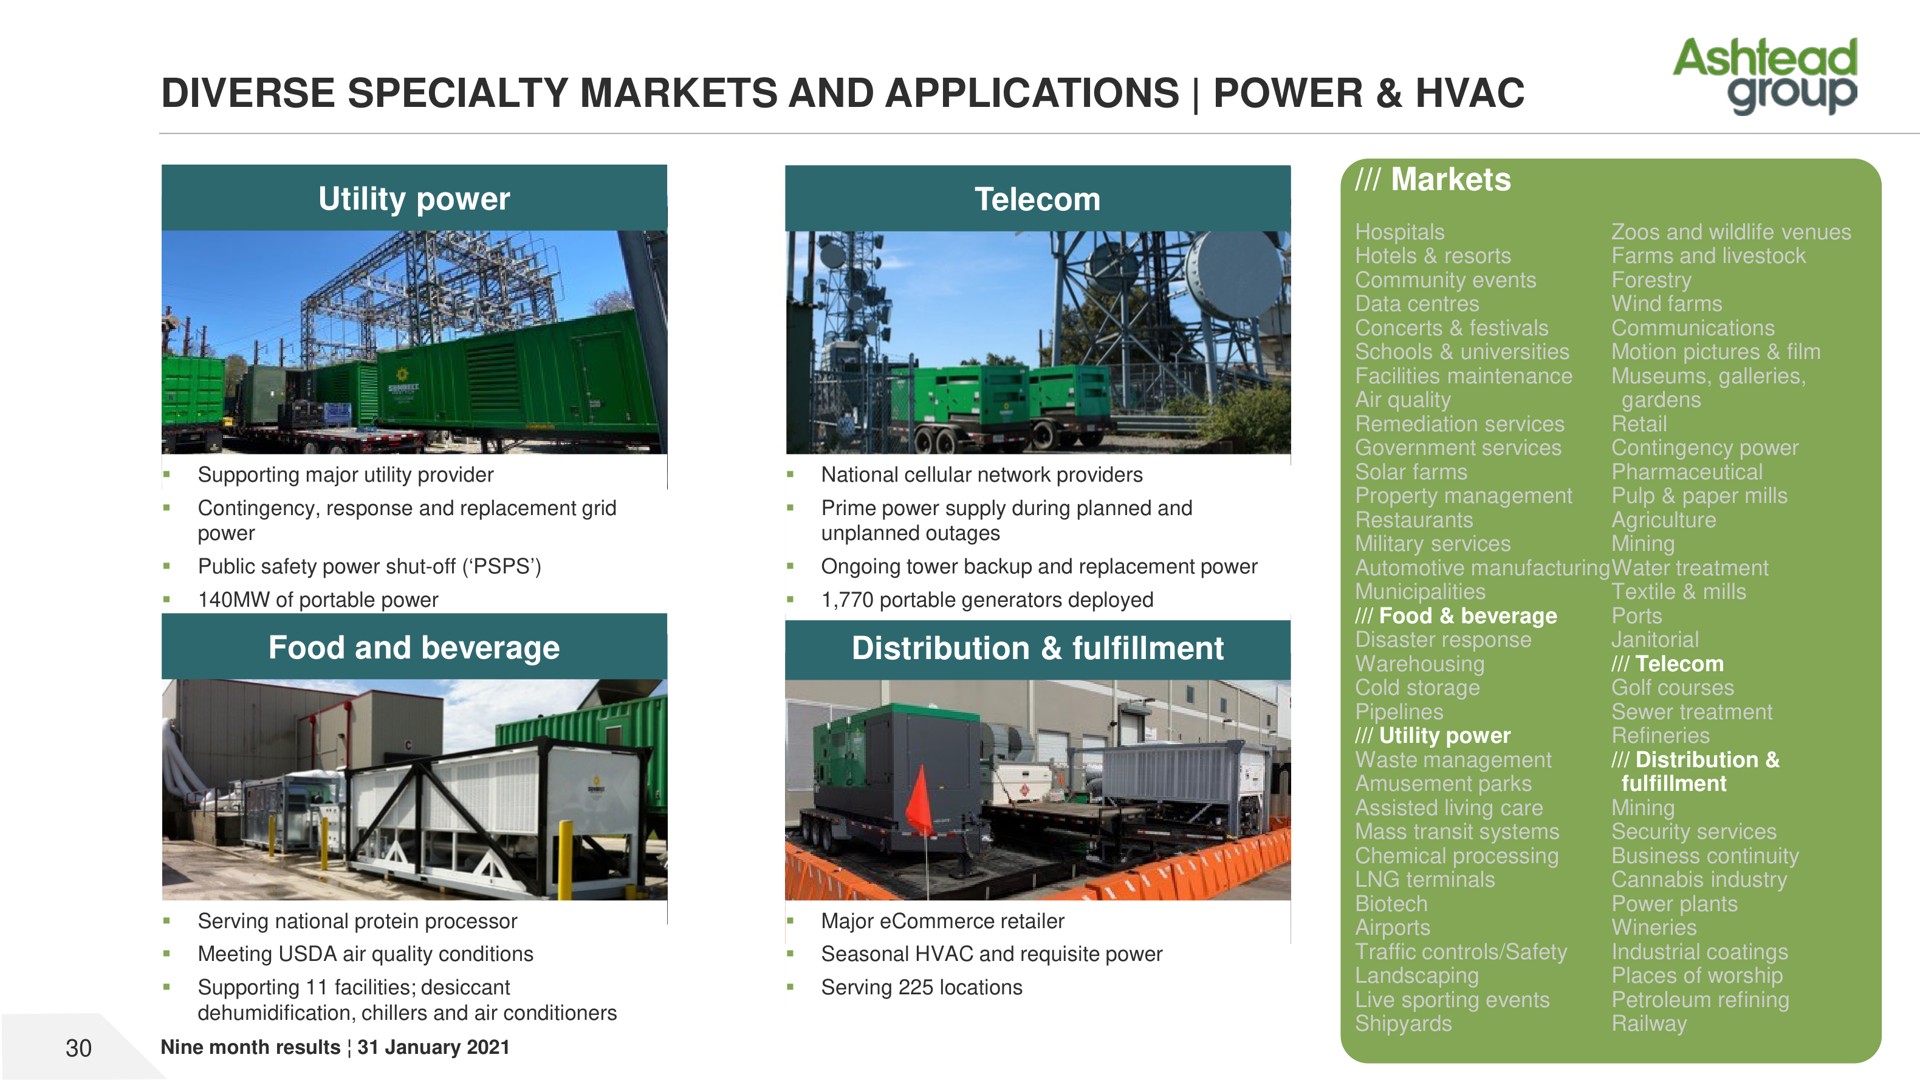 diverse specialty markets and applications power utility power food and beverage distribution fulfillment markets group tie | Ashtead Group